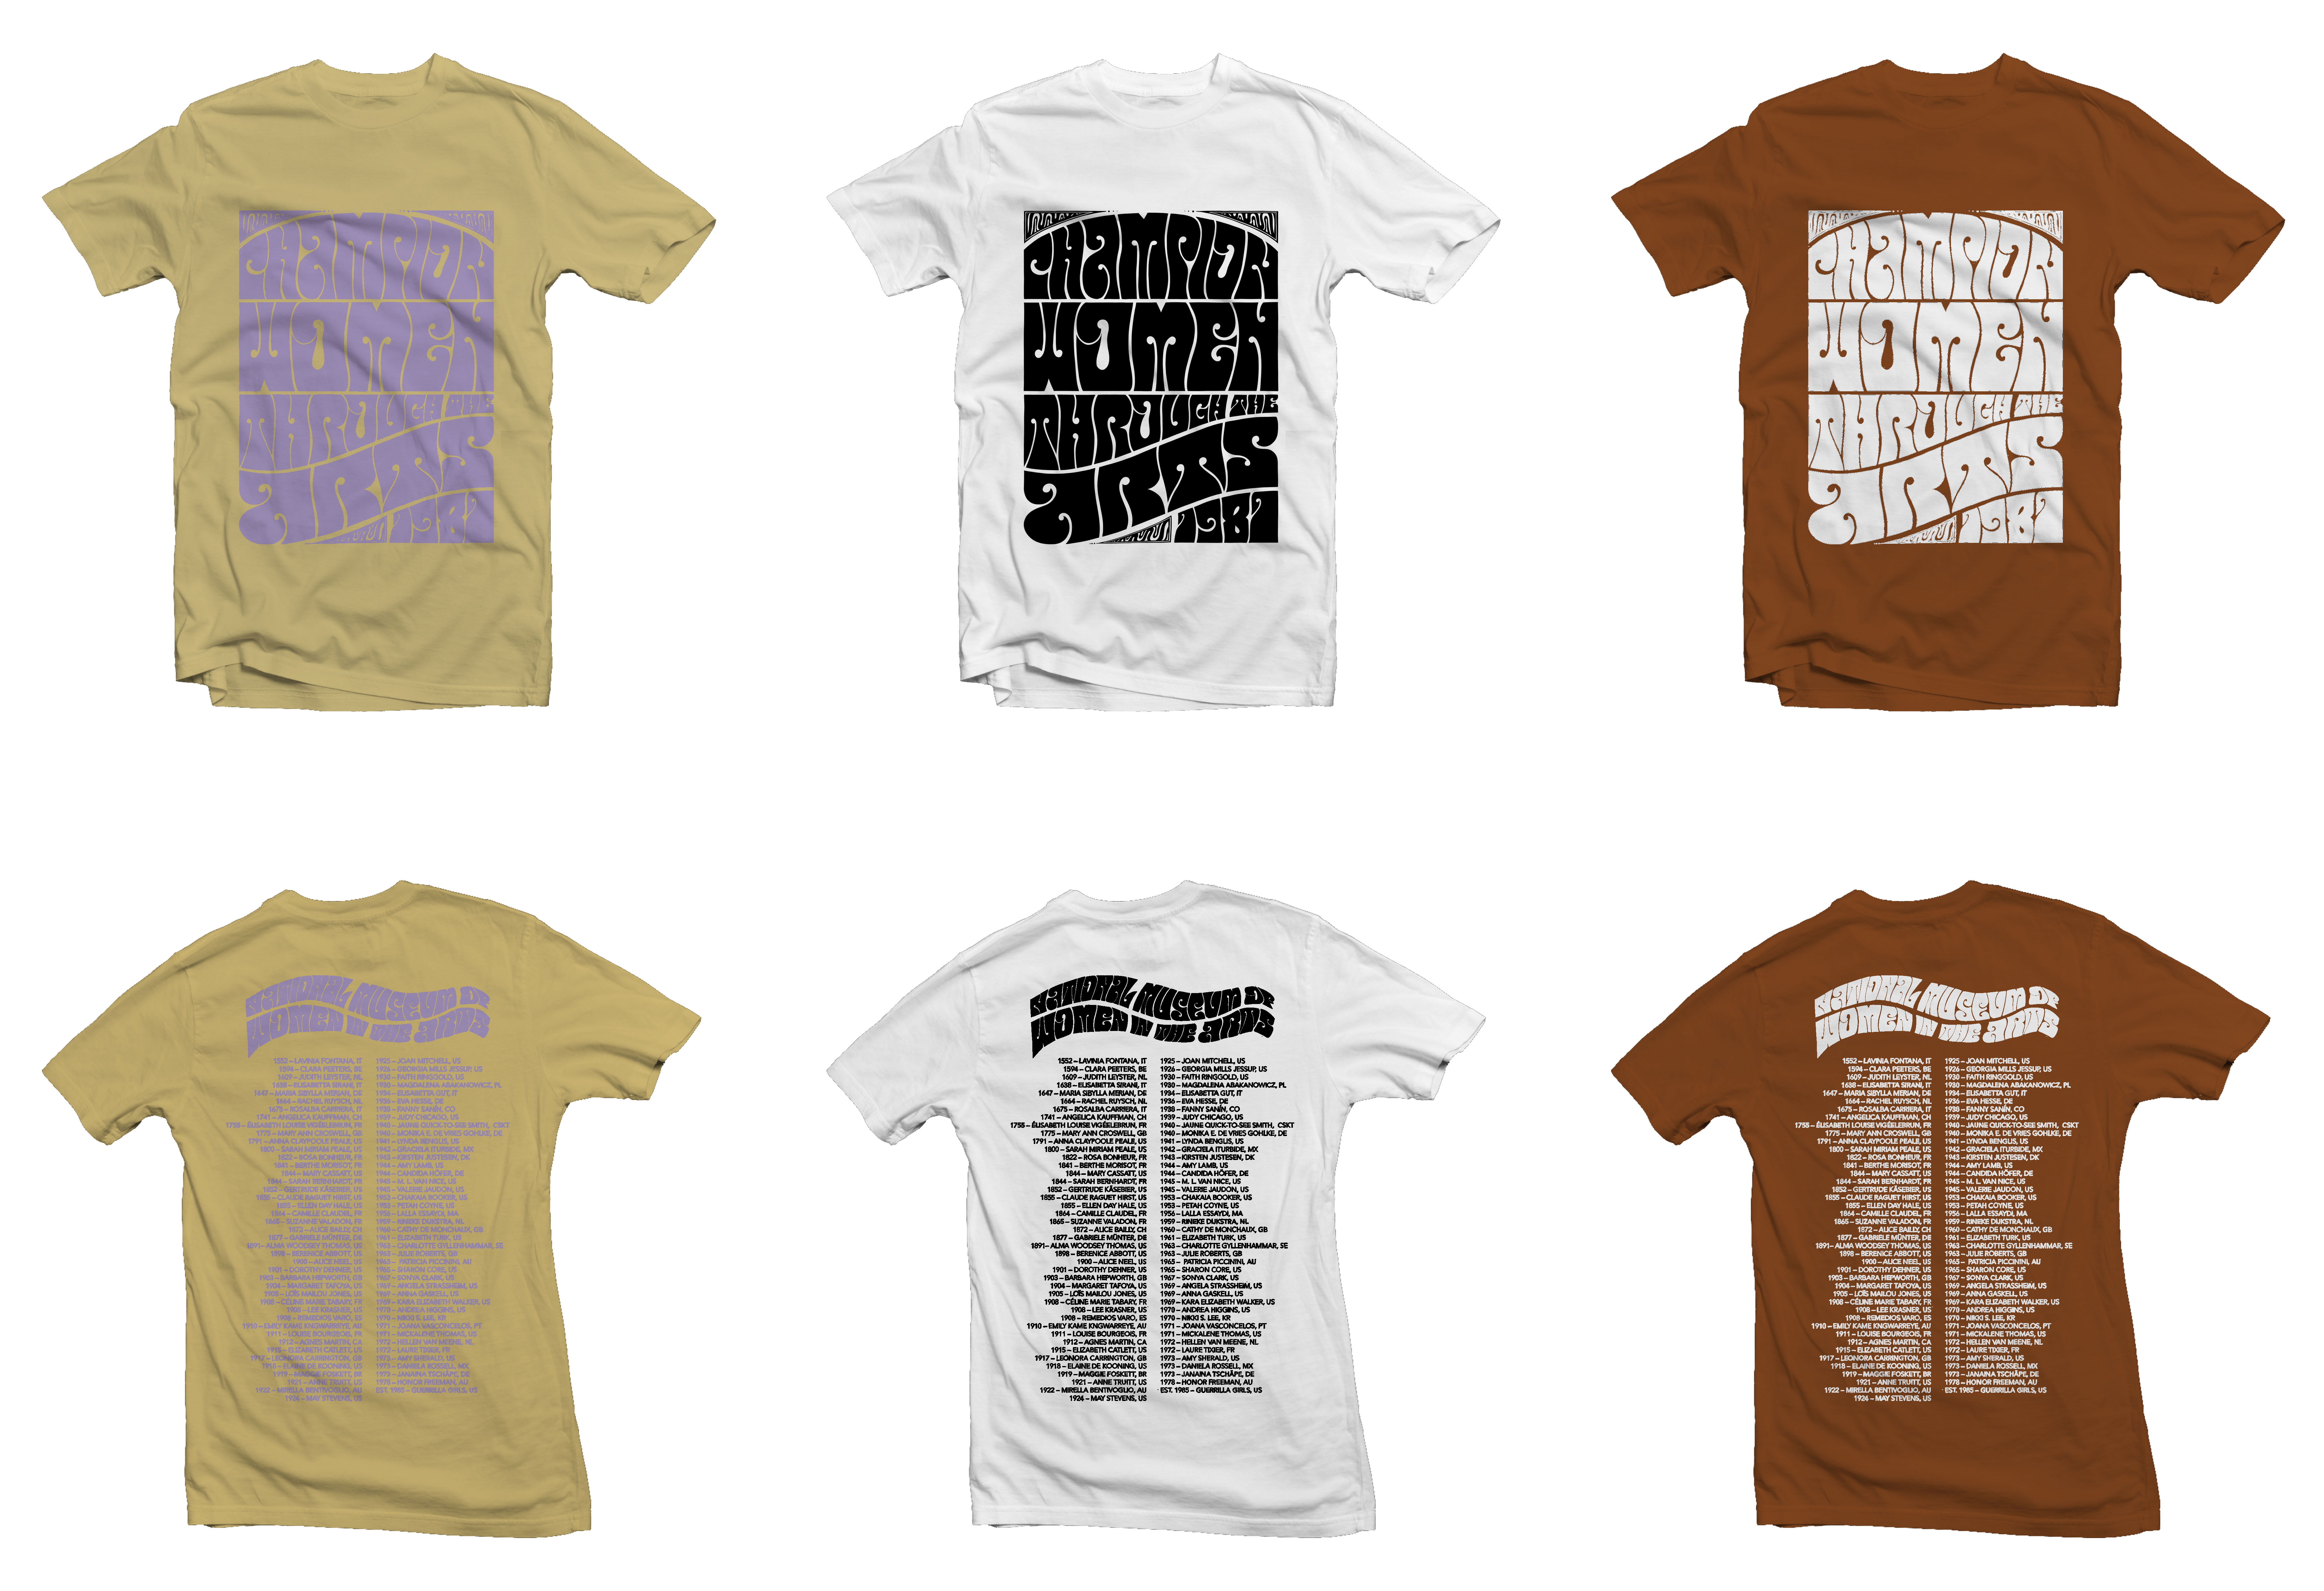 Three T-shirts are photographed against a white background in a row, with three idential versions below them. The top row shows the front of the shirt, which says "Champion Women Through the Arts" in psychadelic lettering, and the bottom row shows a different design, which cannot be read, but looks similar to the listings of concert dates on a rock tour. The colors of the shirts are earthy: one sand with lilac lettering, one white with black lettering, and the other medium-brown with white lettering.